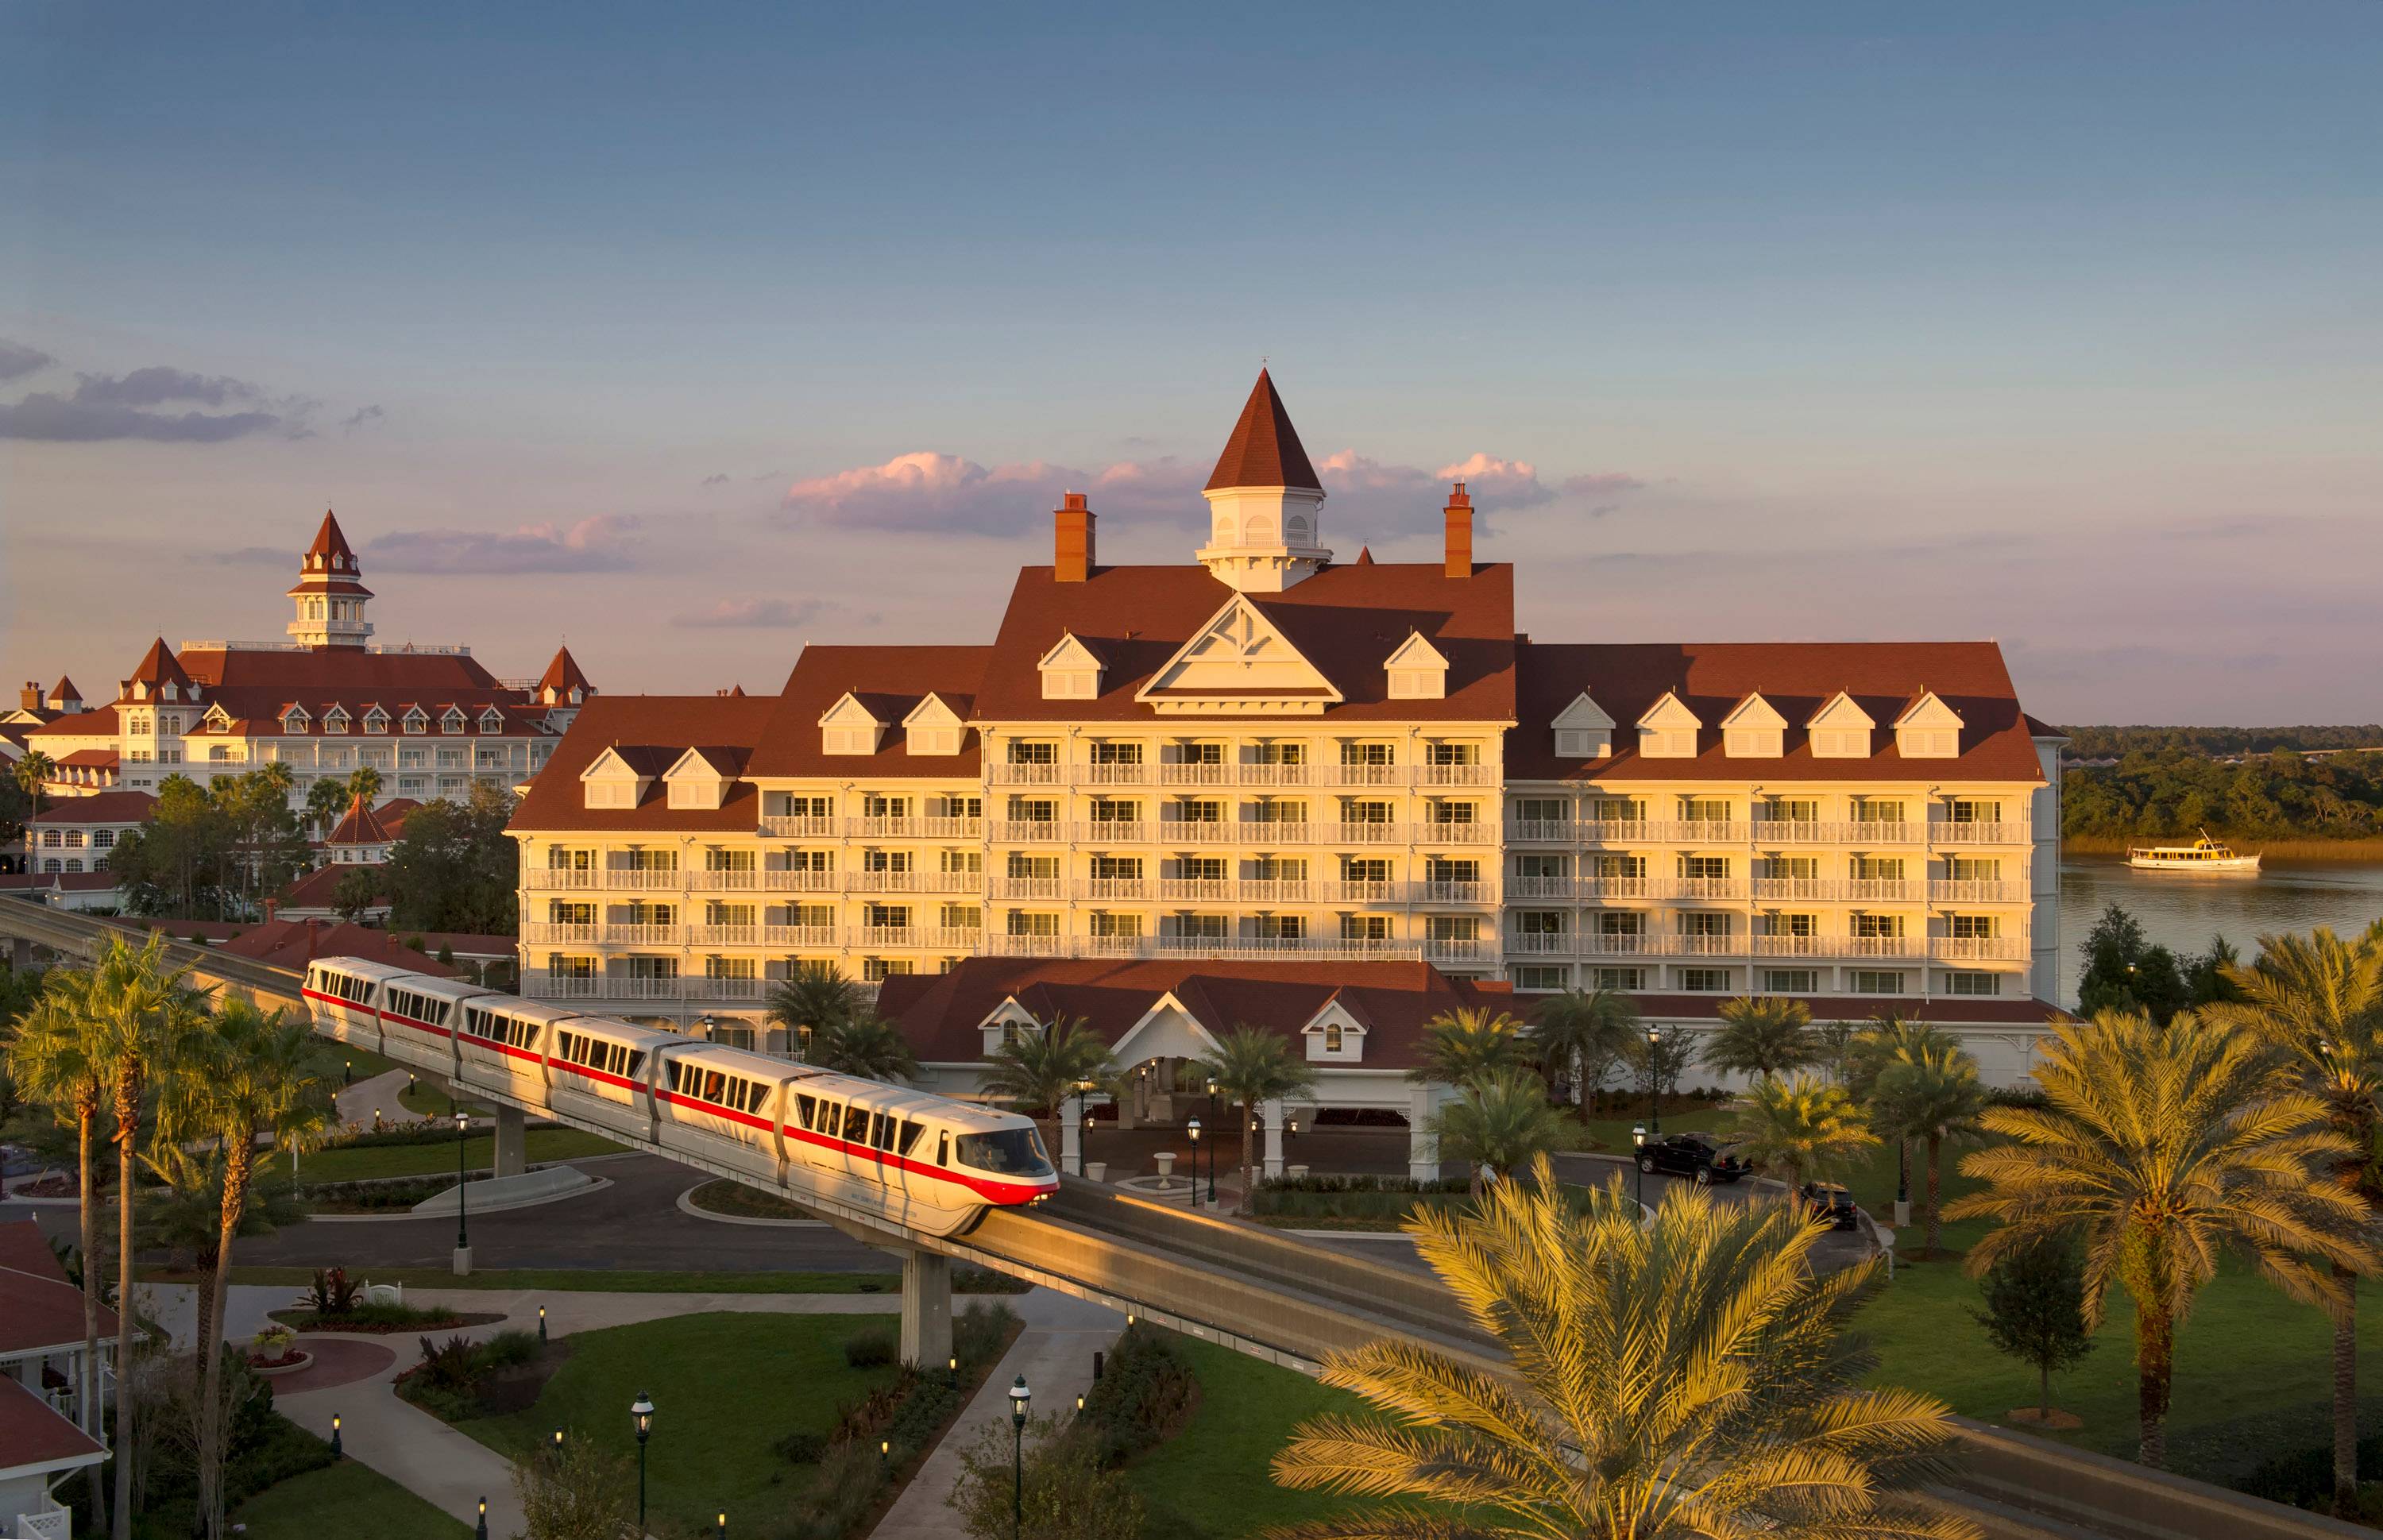 The Villas at Disney’s Grand Floridian Resort opening day